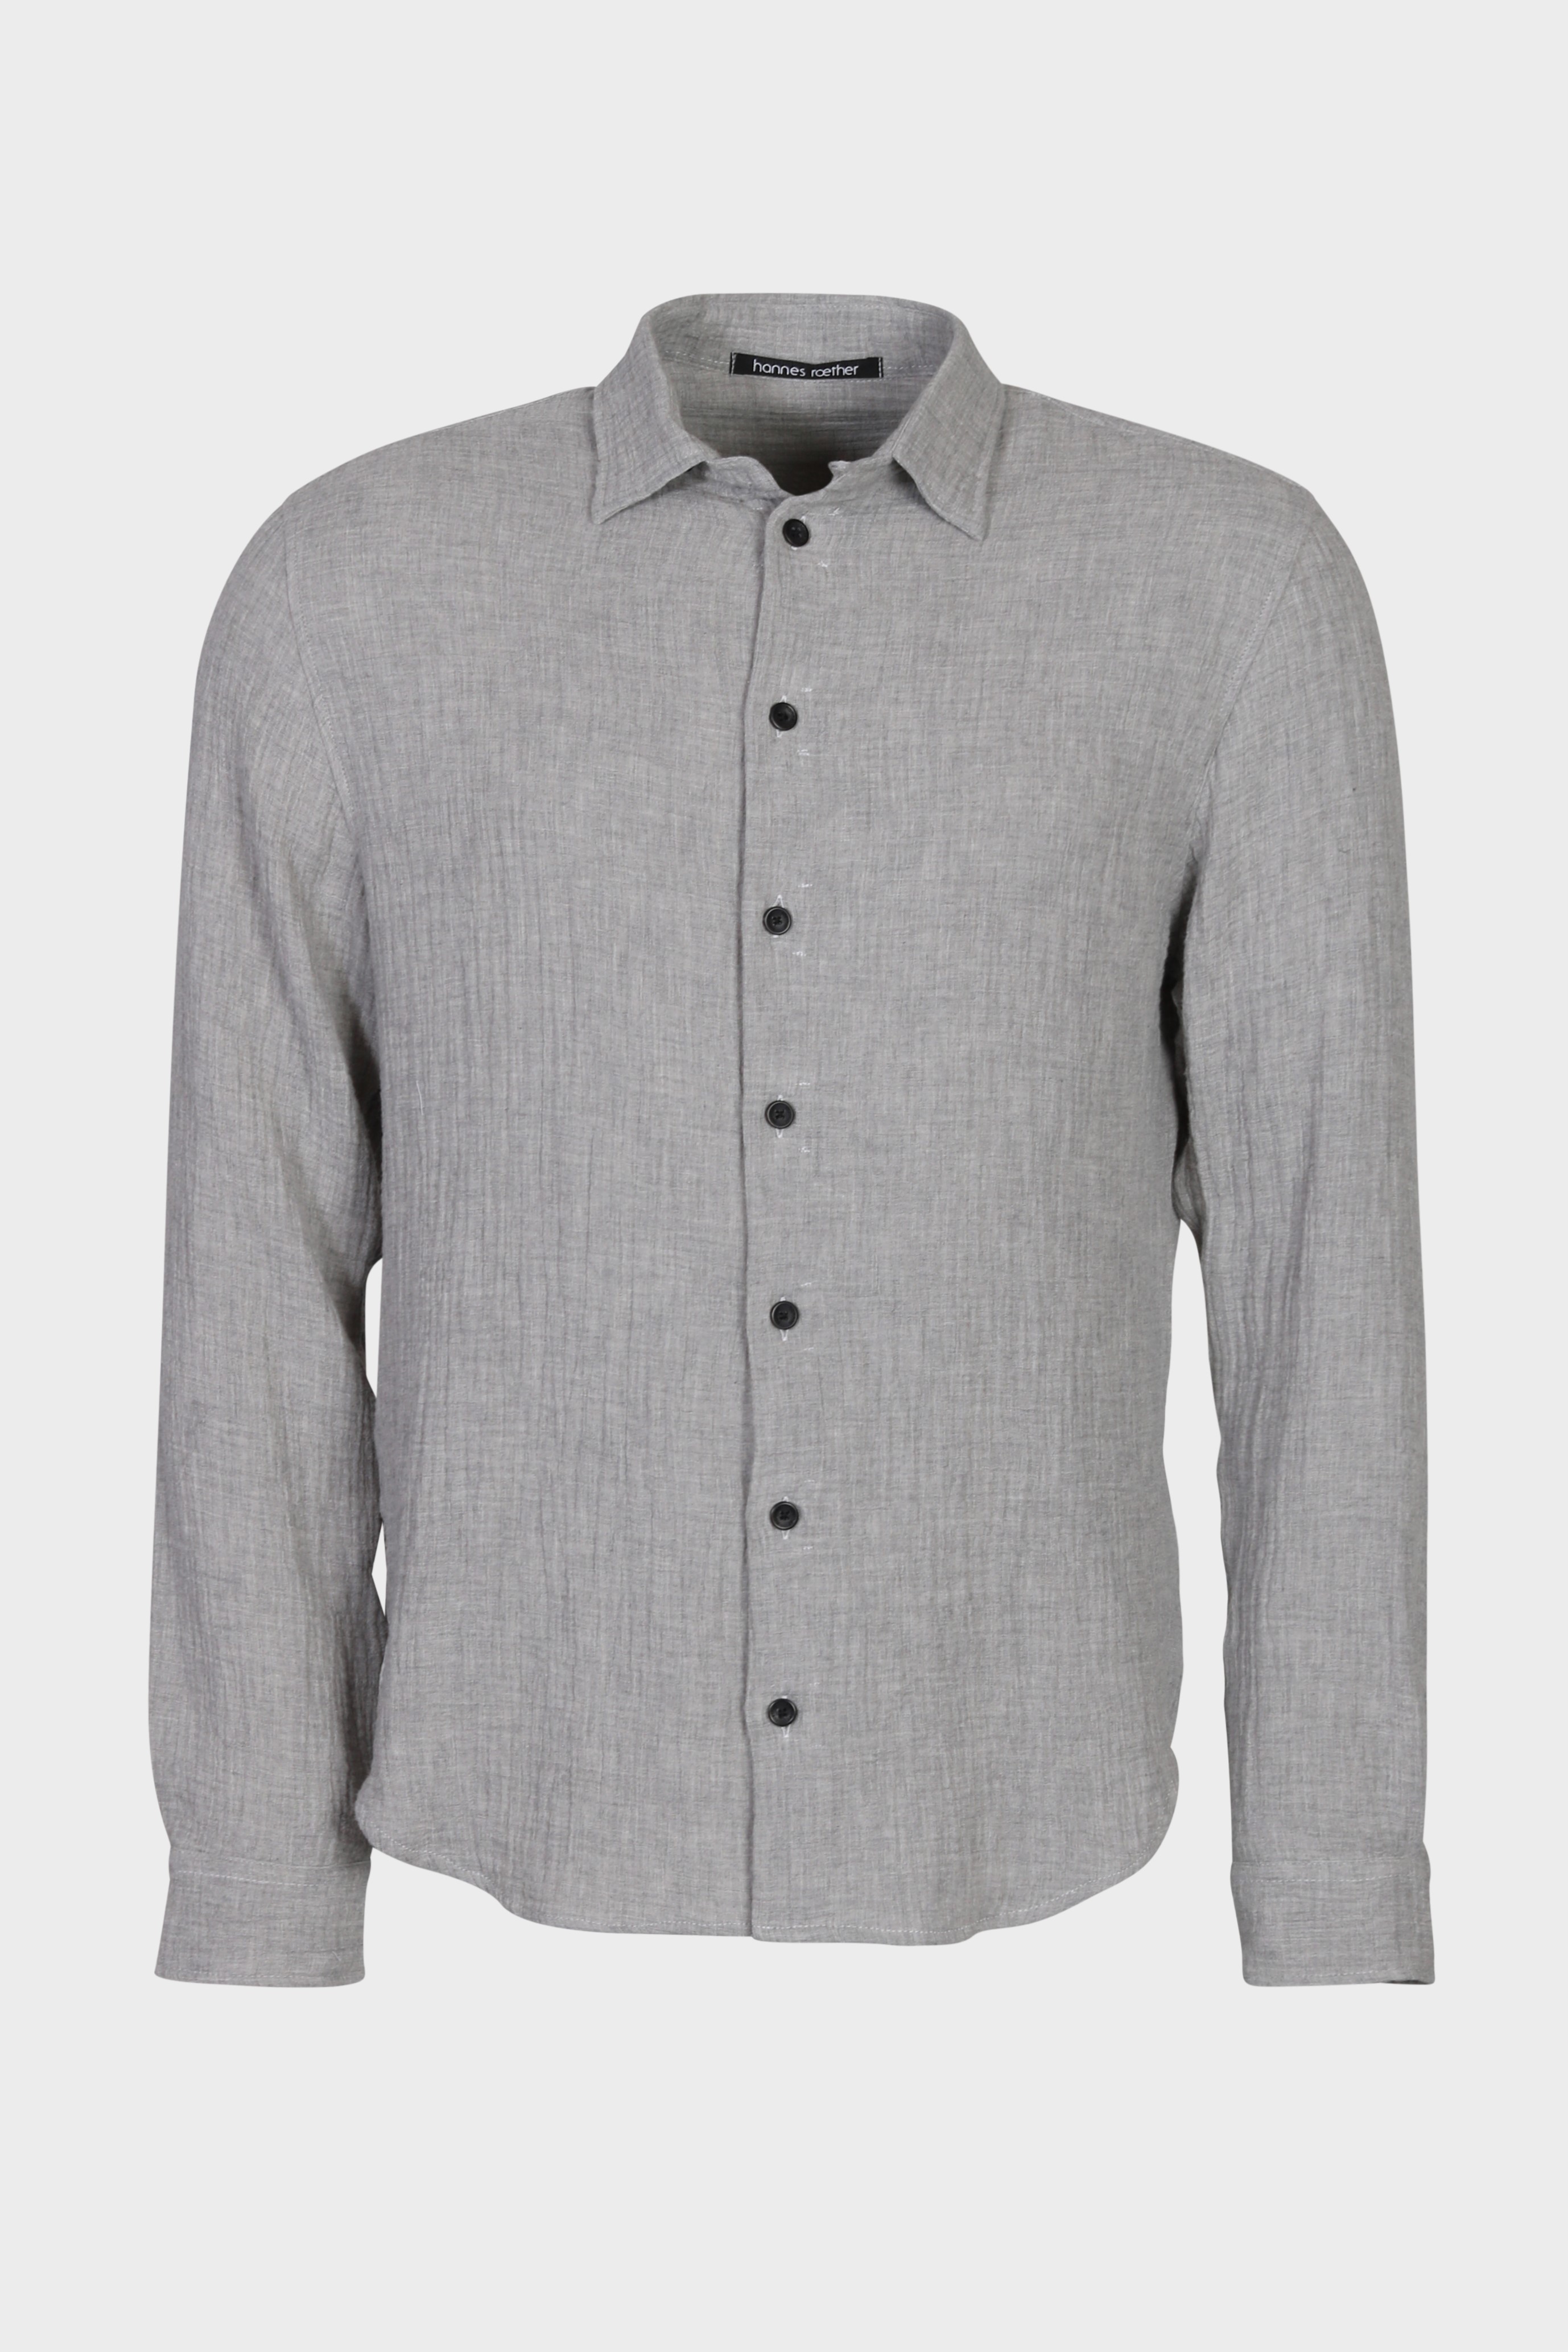 HANNES ROETHER Mousseline Shirt in Light Grey M